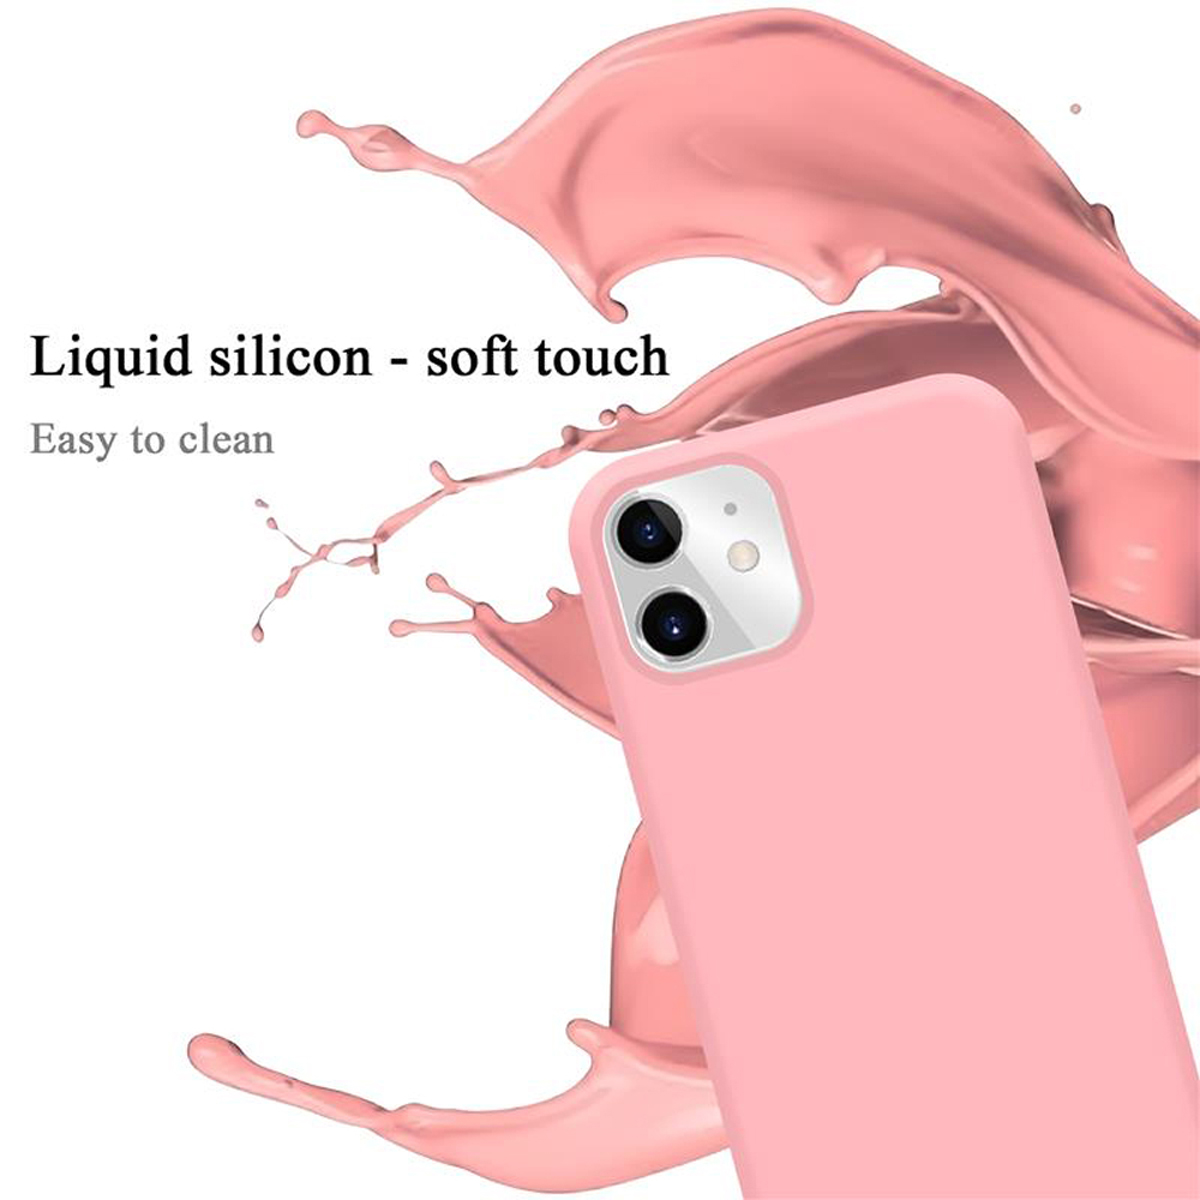 im Hülle iPhone 11, LIQUID Liquid Case Silicone Apple, Backcover, CADORABO PINK Style,